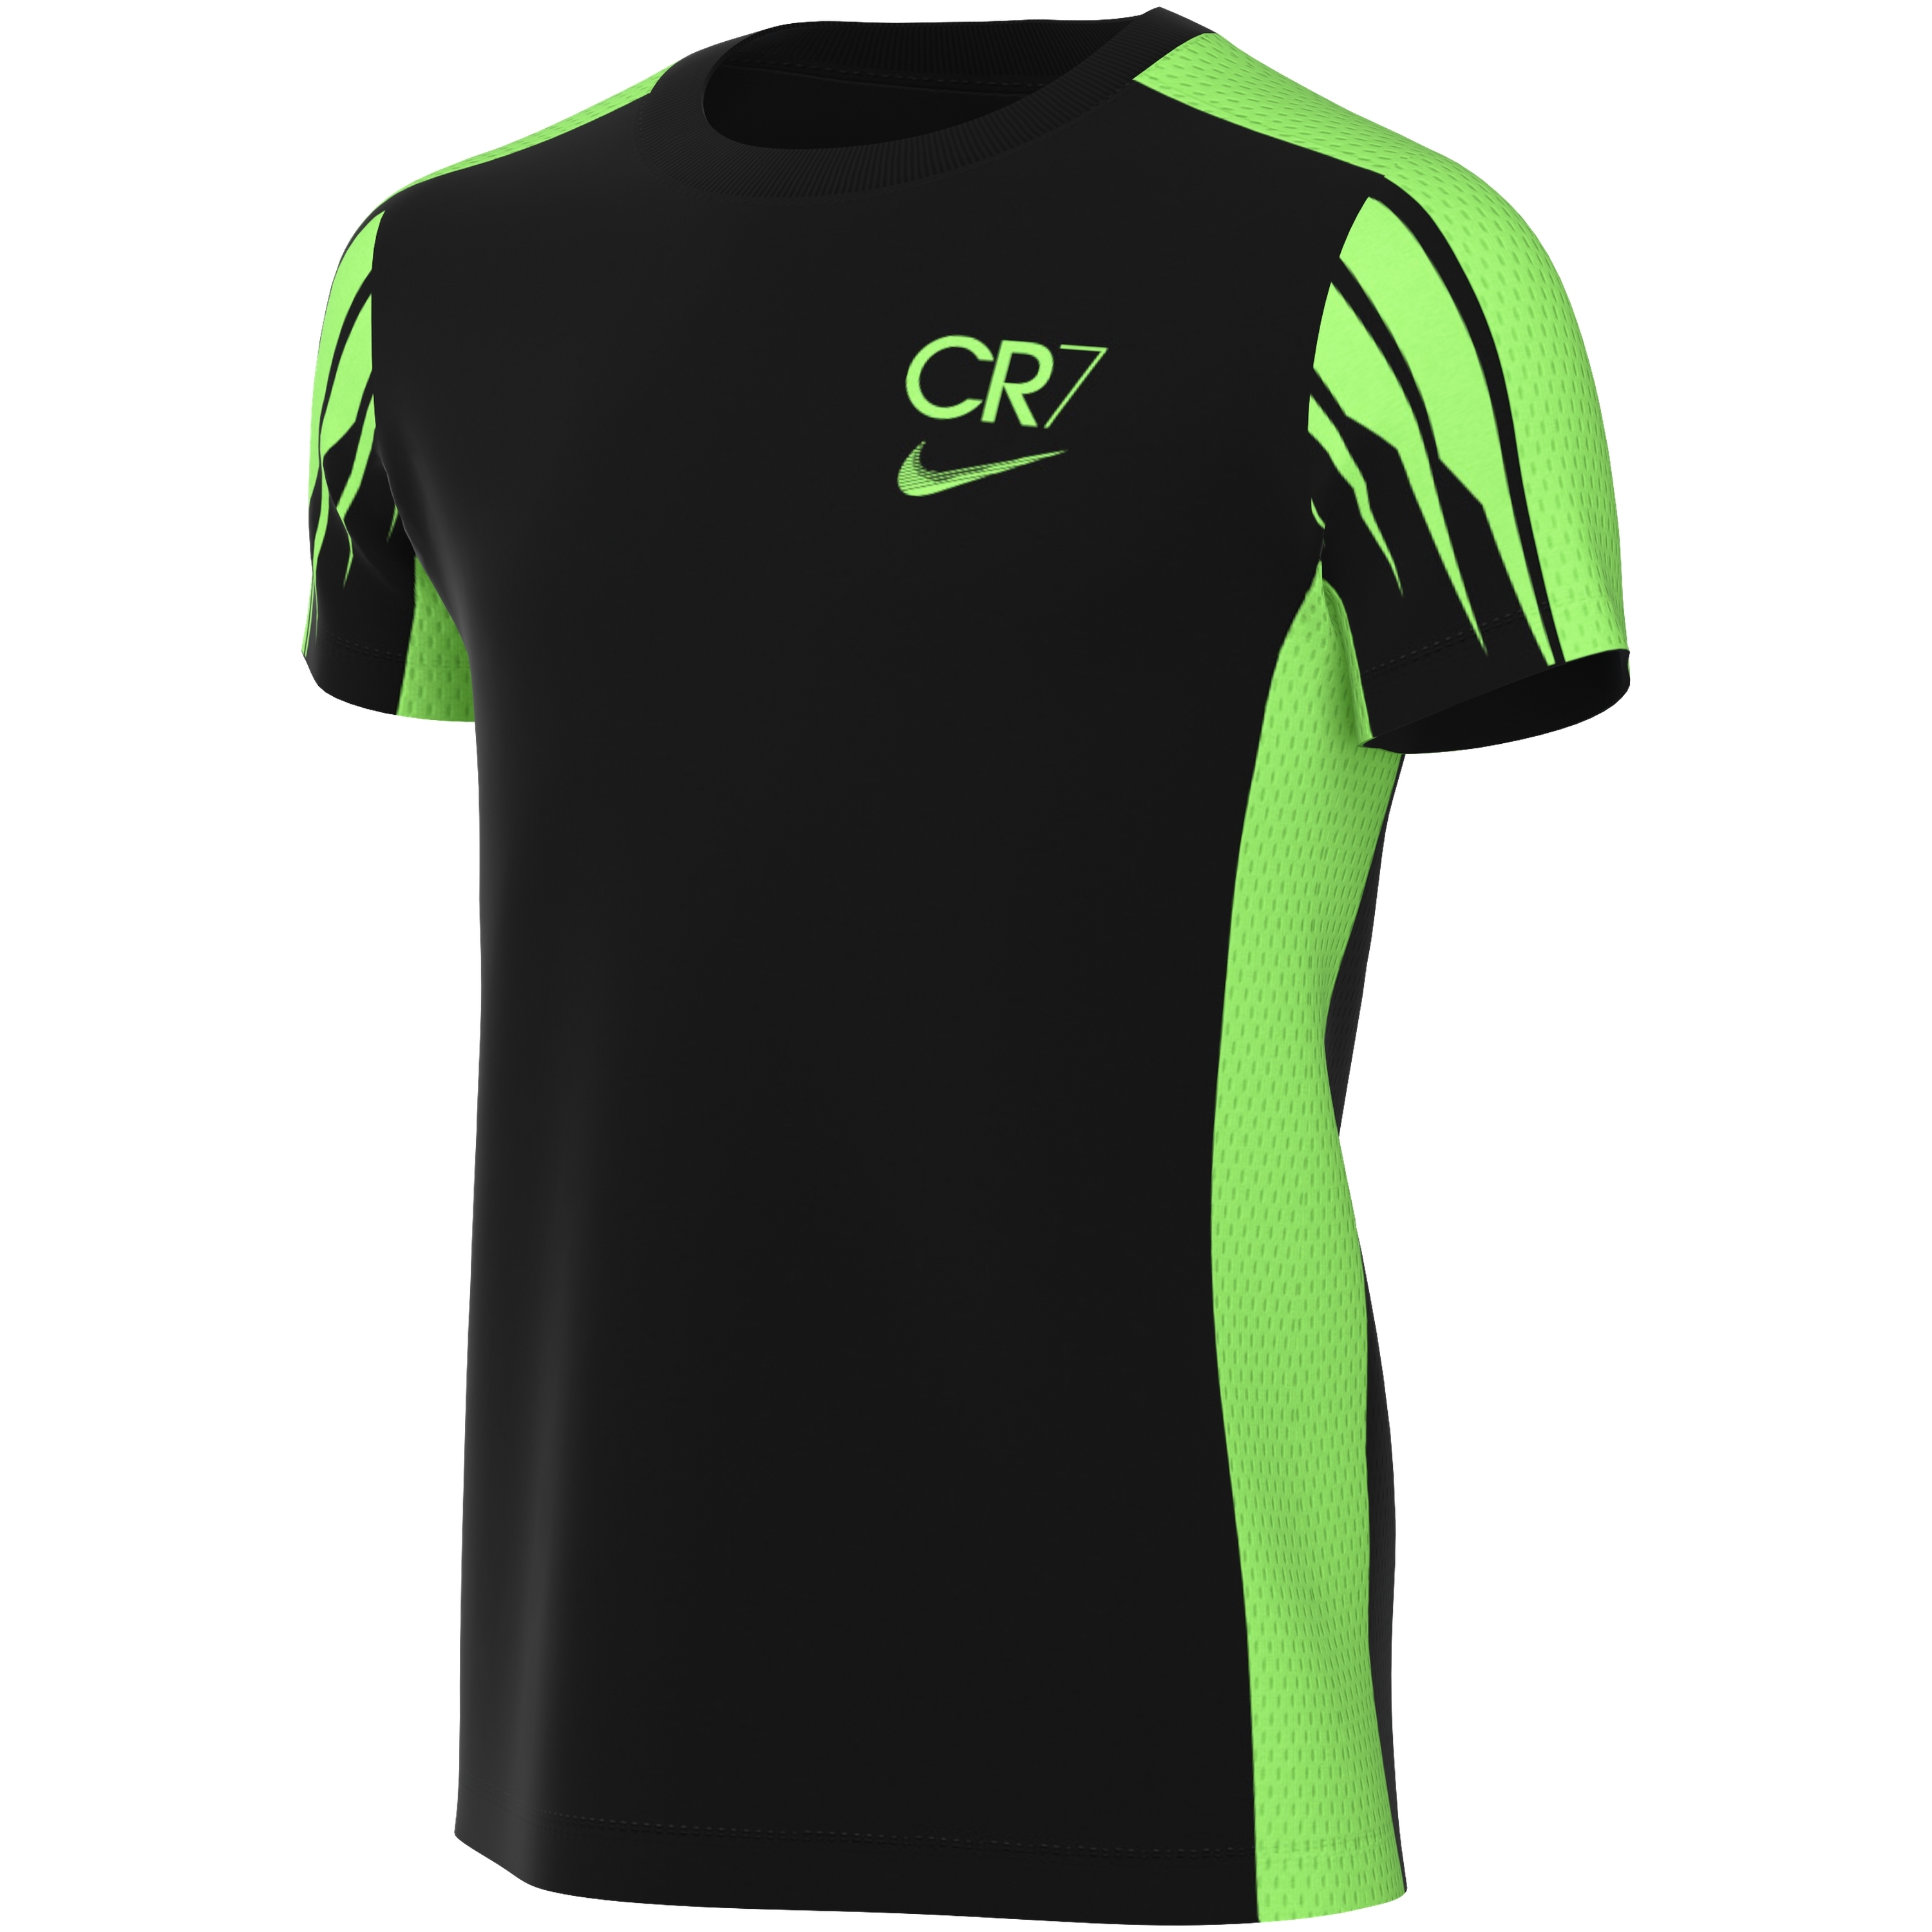 children's jersey nike academy player edition:cr7 dri-fit